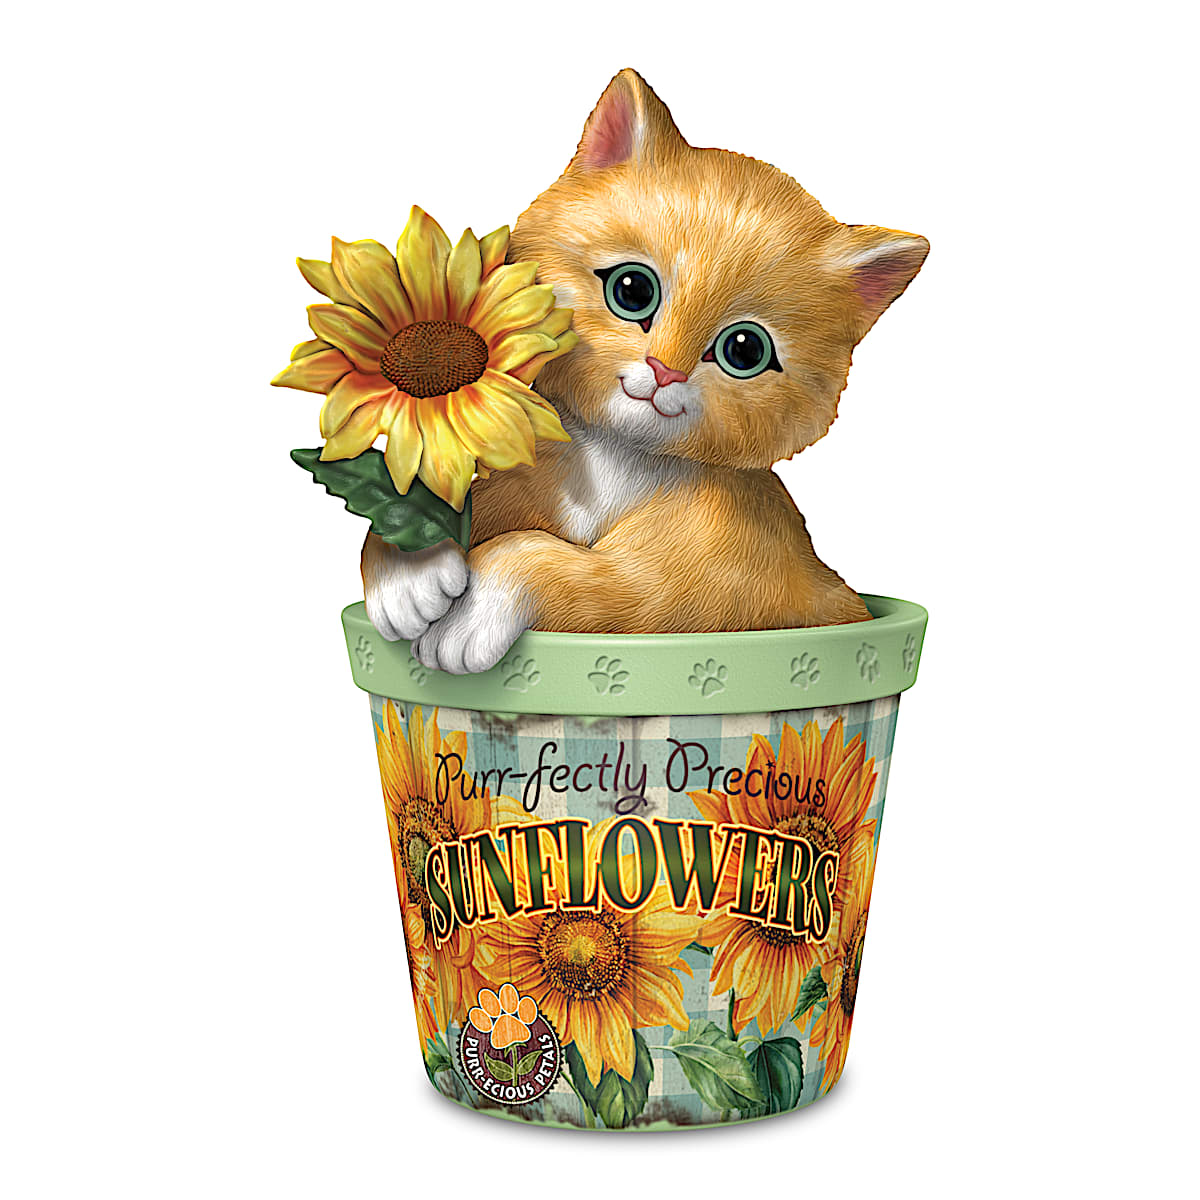 Purr-fectly Precious Sunflower Inspired By The Art Of Kayomi Harai  Featuring A Hand-Painted Cat Figurine In A Flowerpot Adorned With Paw Prints